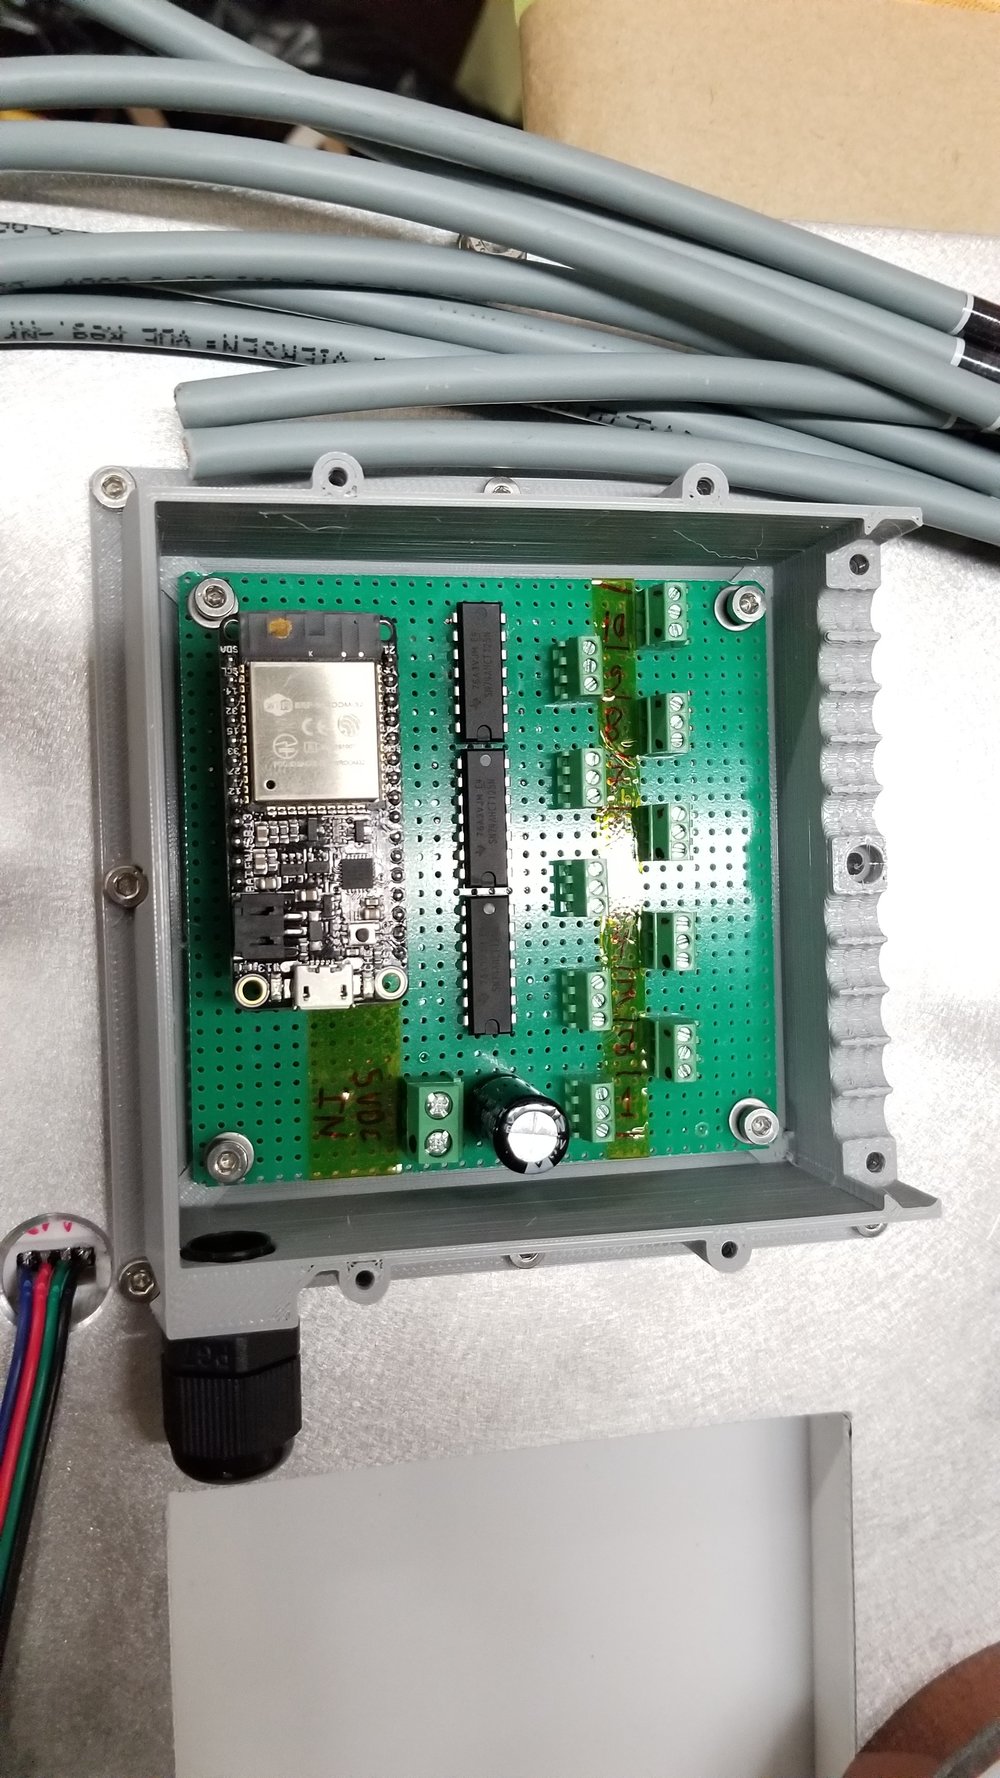  Controller board installed in controller housing. 